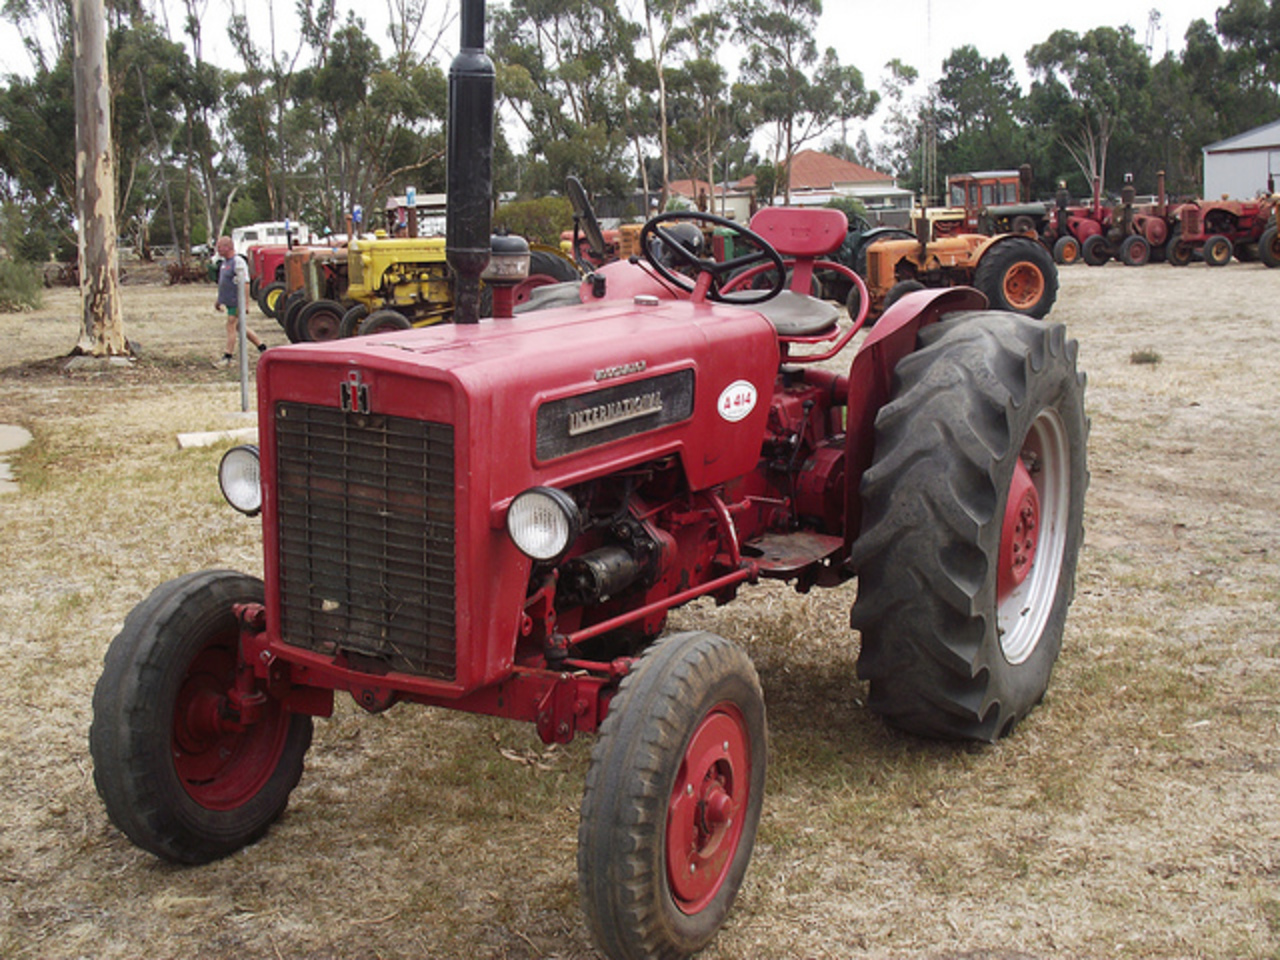 Flickr: The Red Tractor in the World Pool